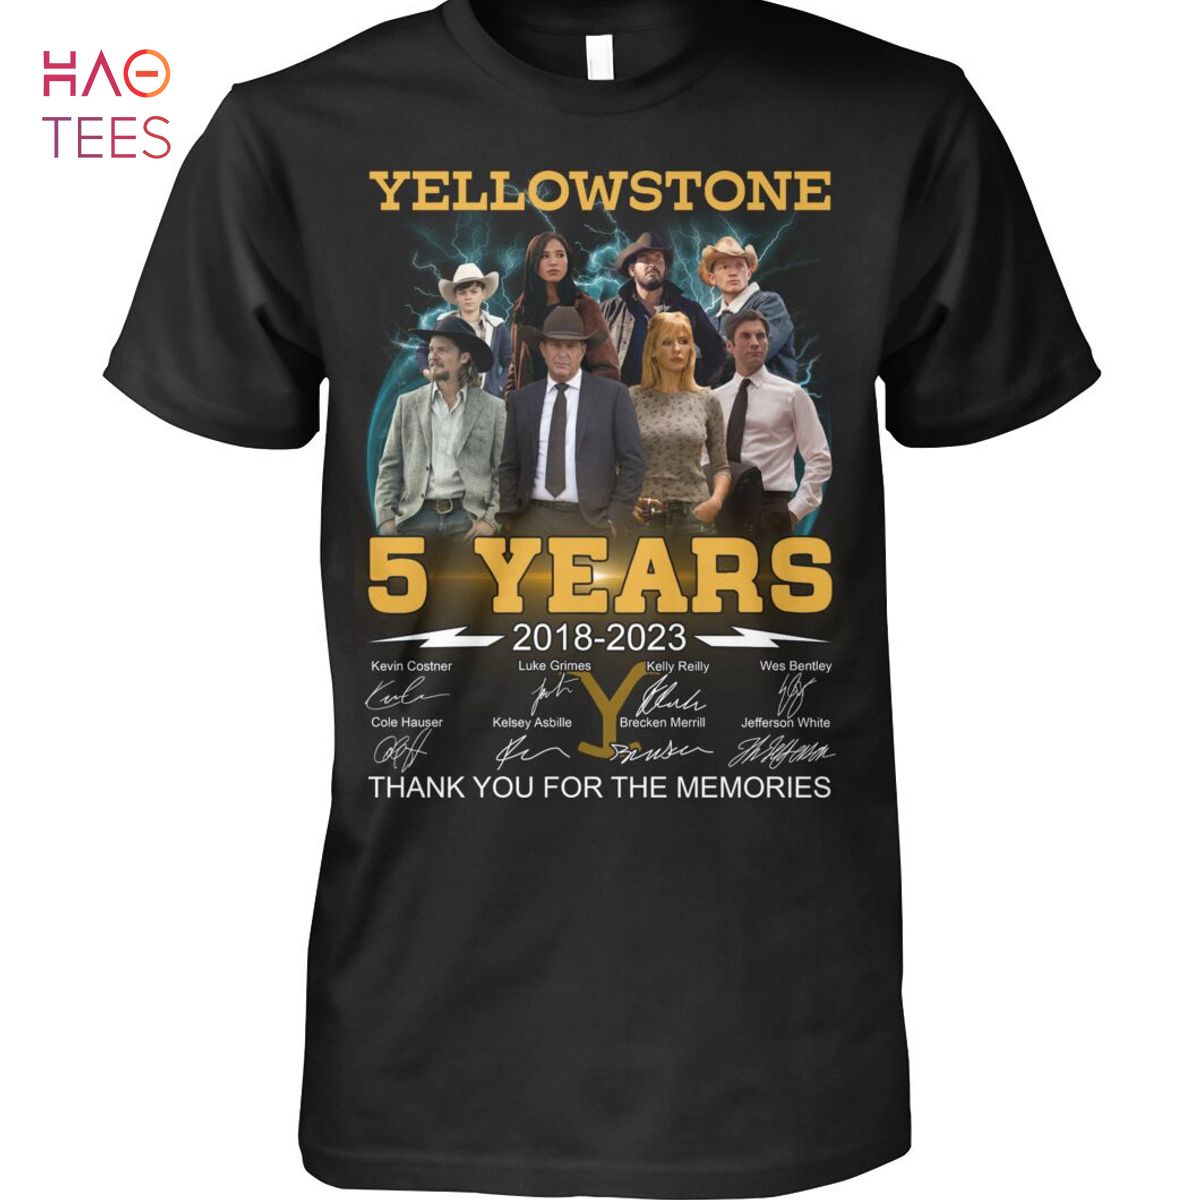 Yellowstone 5 Years 2018-2023 Thank You For The Memories Shirt